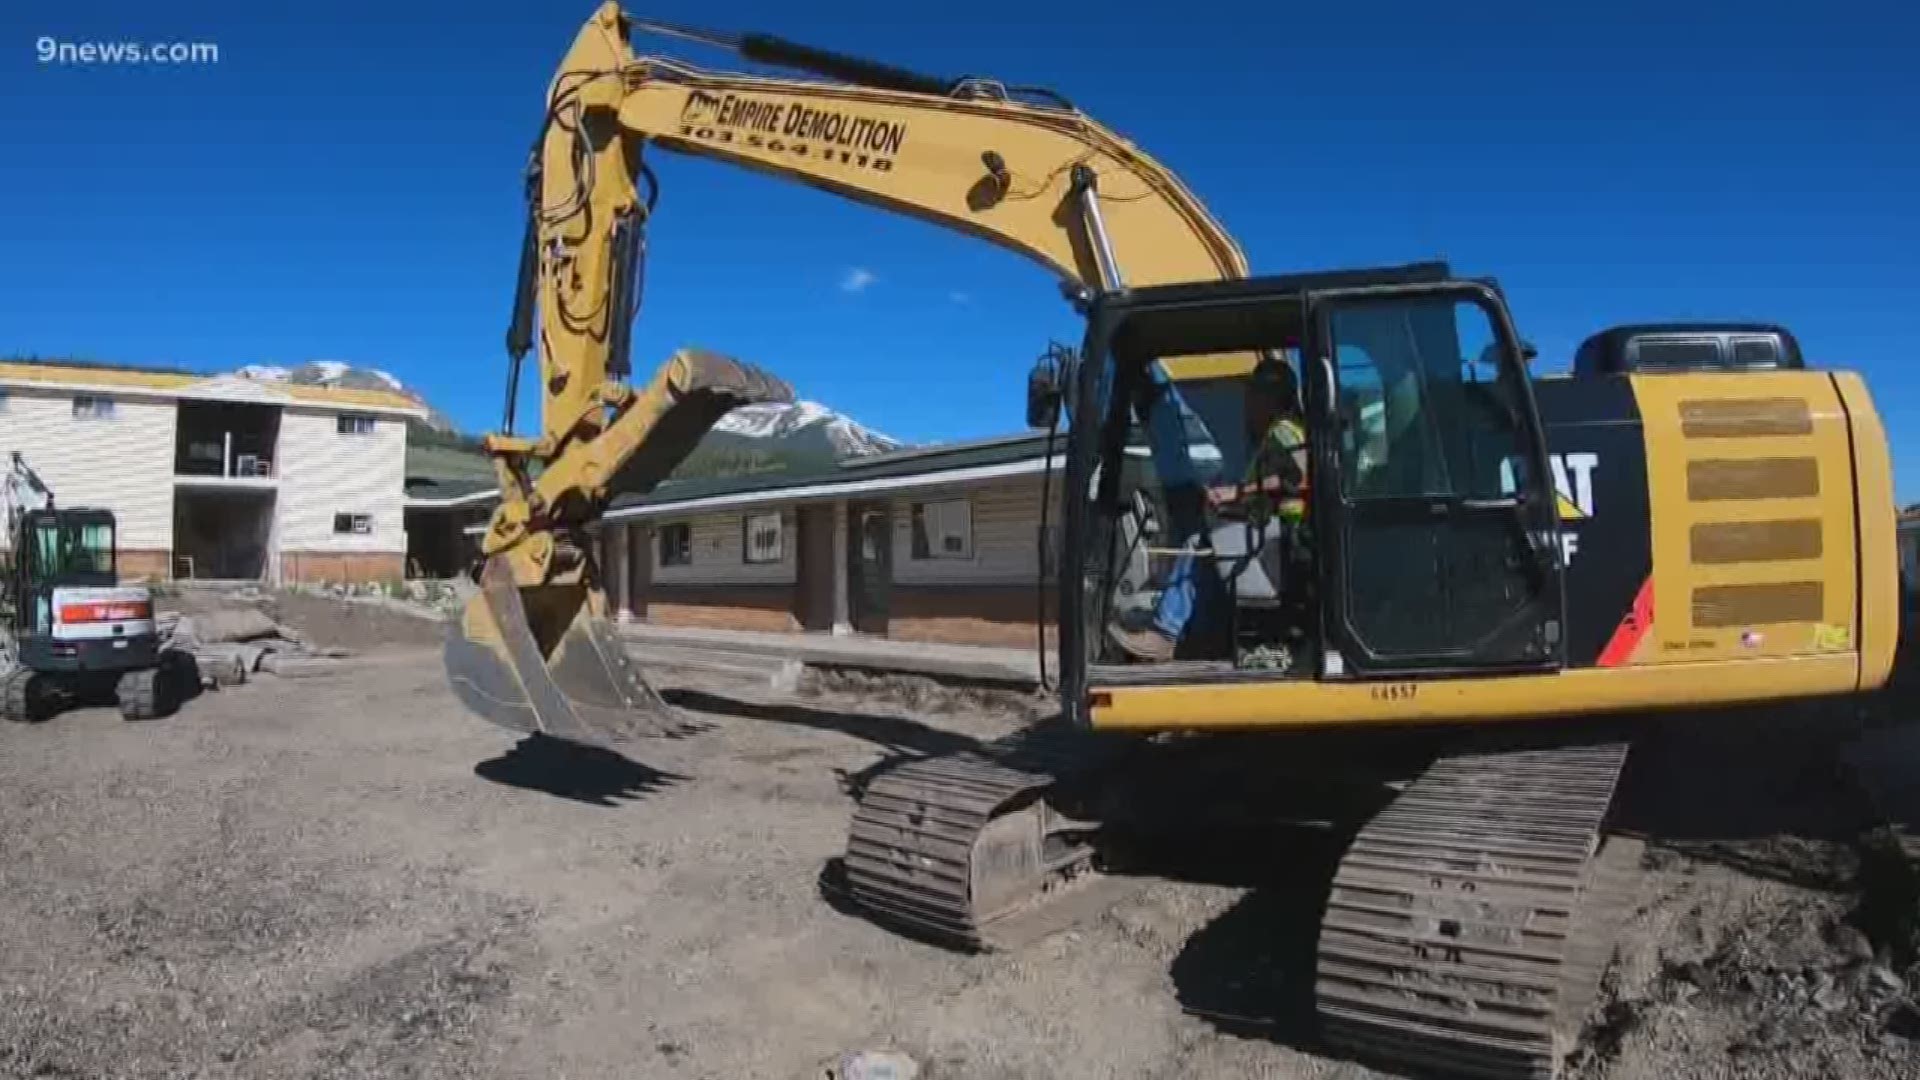 Construction is ramping up in Silverthorne on a brand new downtown area. Several old buildings are being taken down and replaced as part of the project.